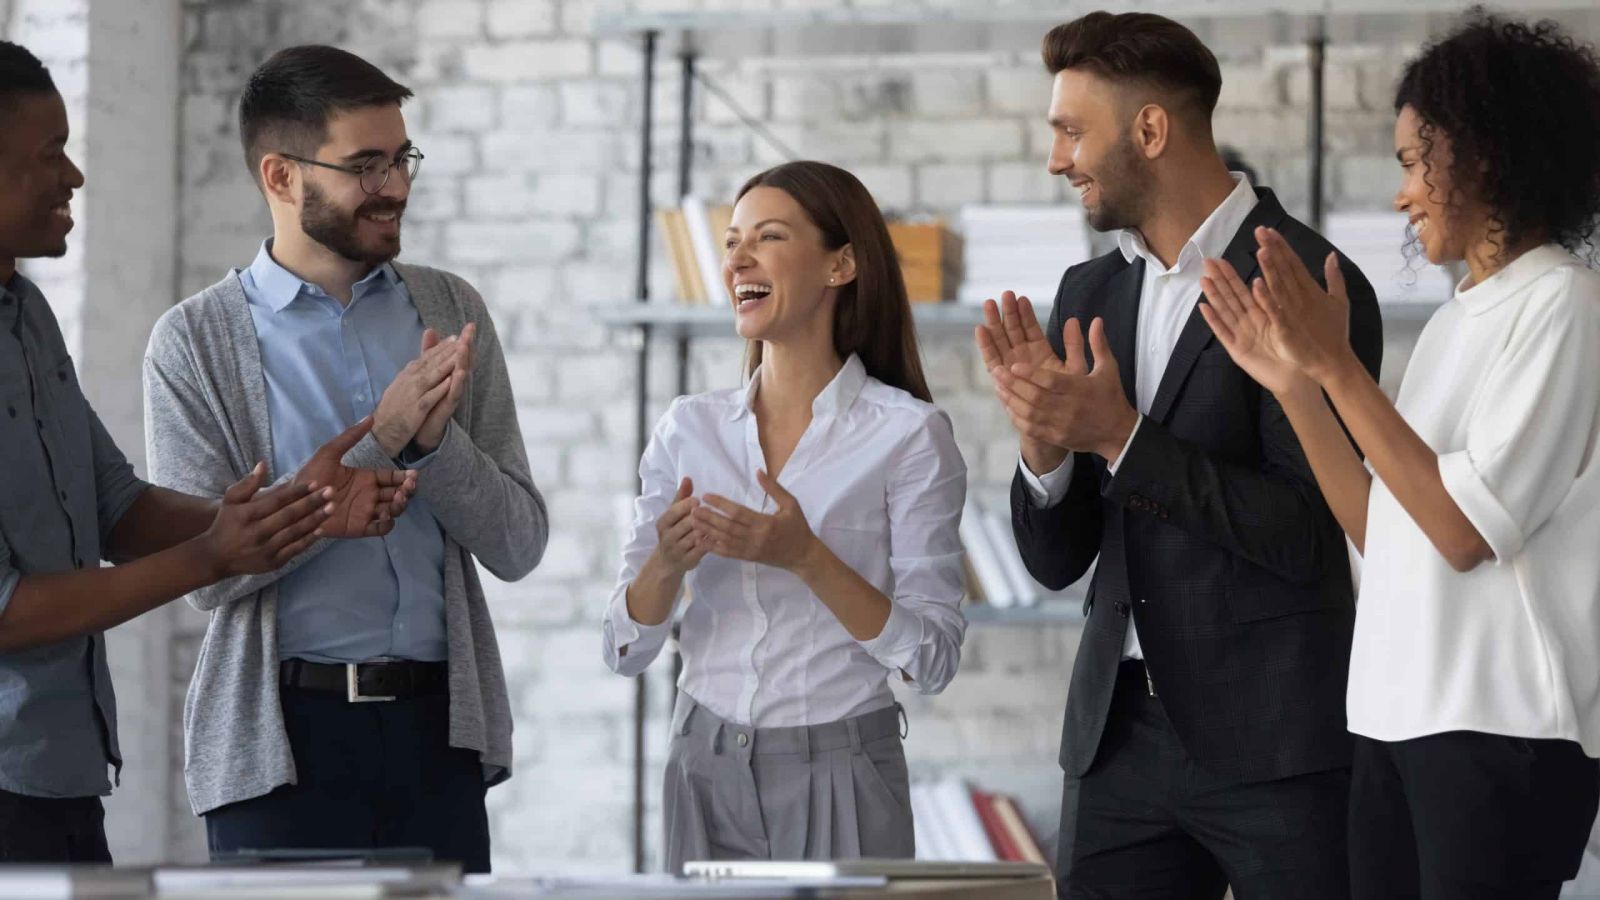 8 Quick Tips for Writing Great Employee Recognition